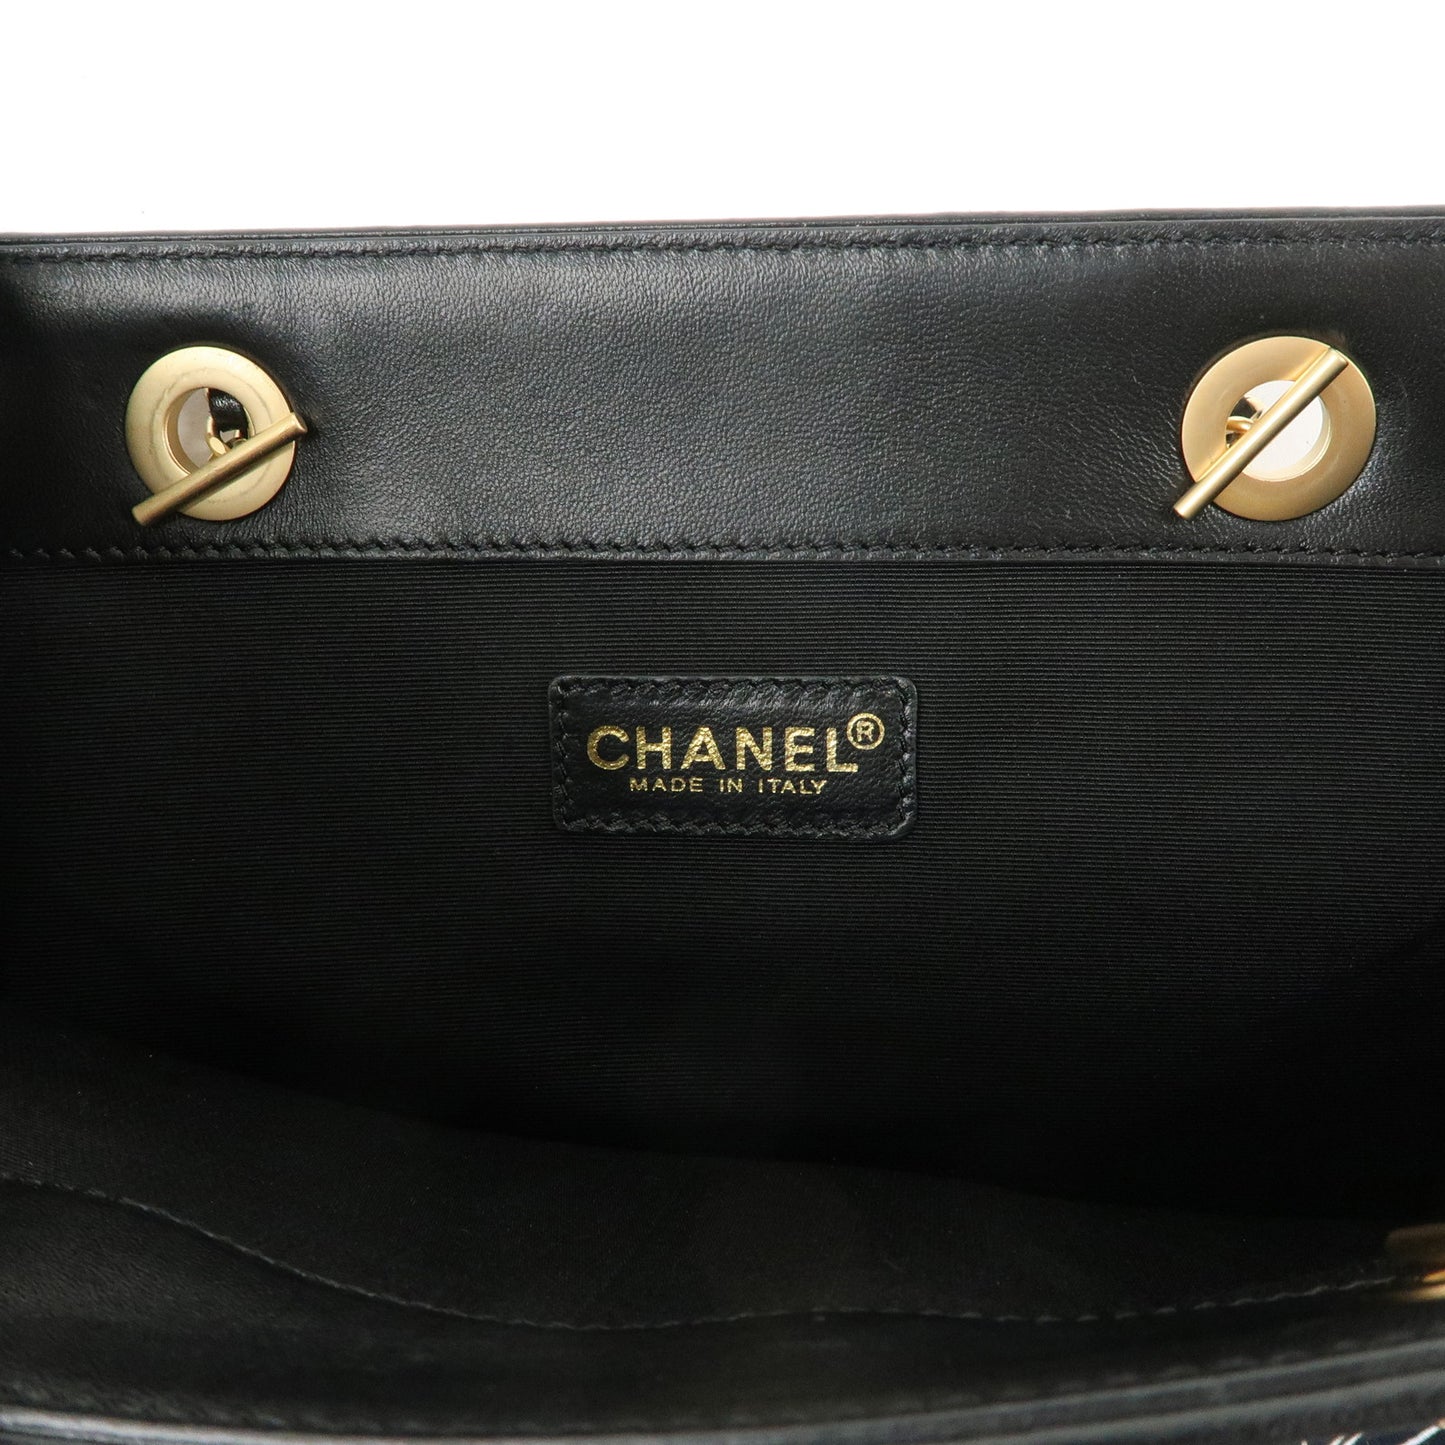 CHANEL Canvas Leather Iconic Chain Tote Bag Hand Bag Black